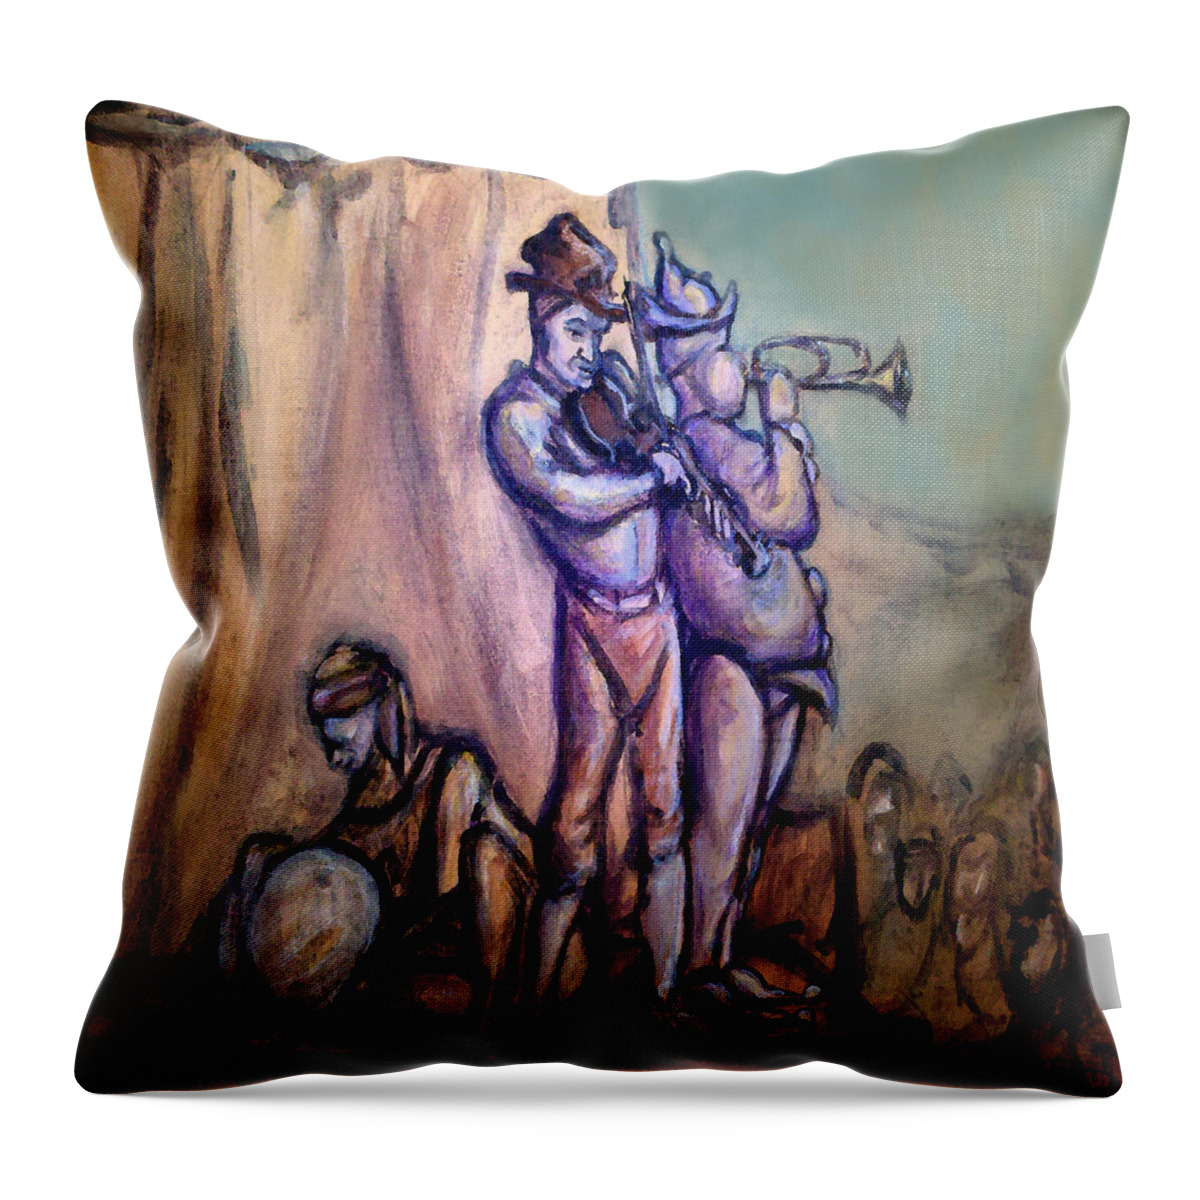 Gypsies Throw Pillow featuring the painting Gypsies Part 2 by Kevin Middleton